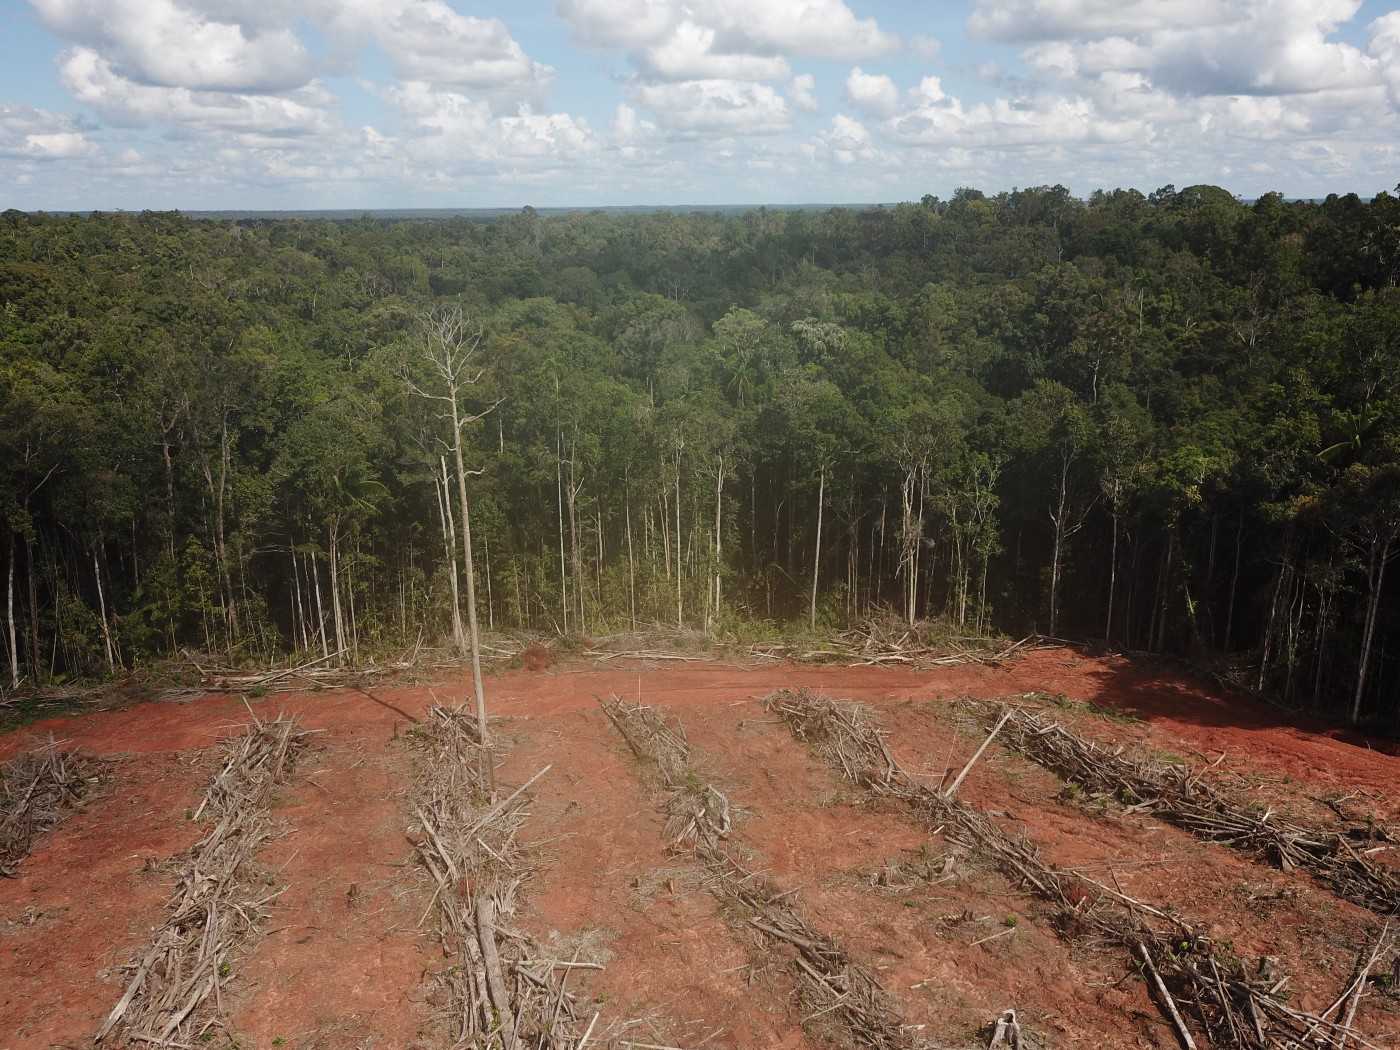 Forest and the boundaries of the area cleared by the Digoel Agri Group. Photo courtesy of Pusaka, January 2020.